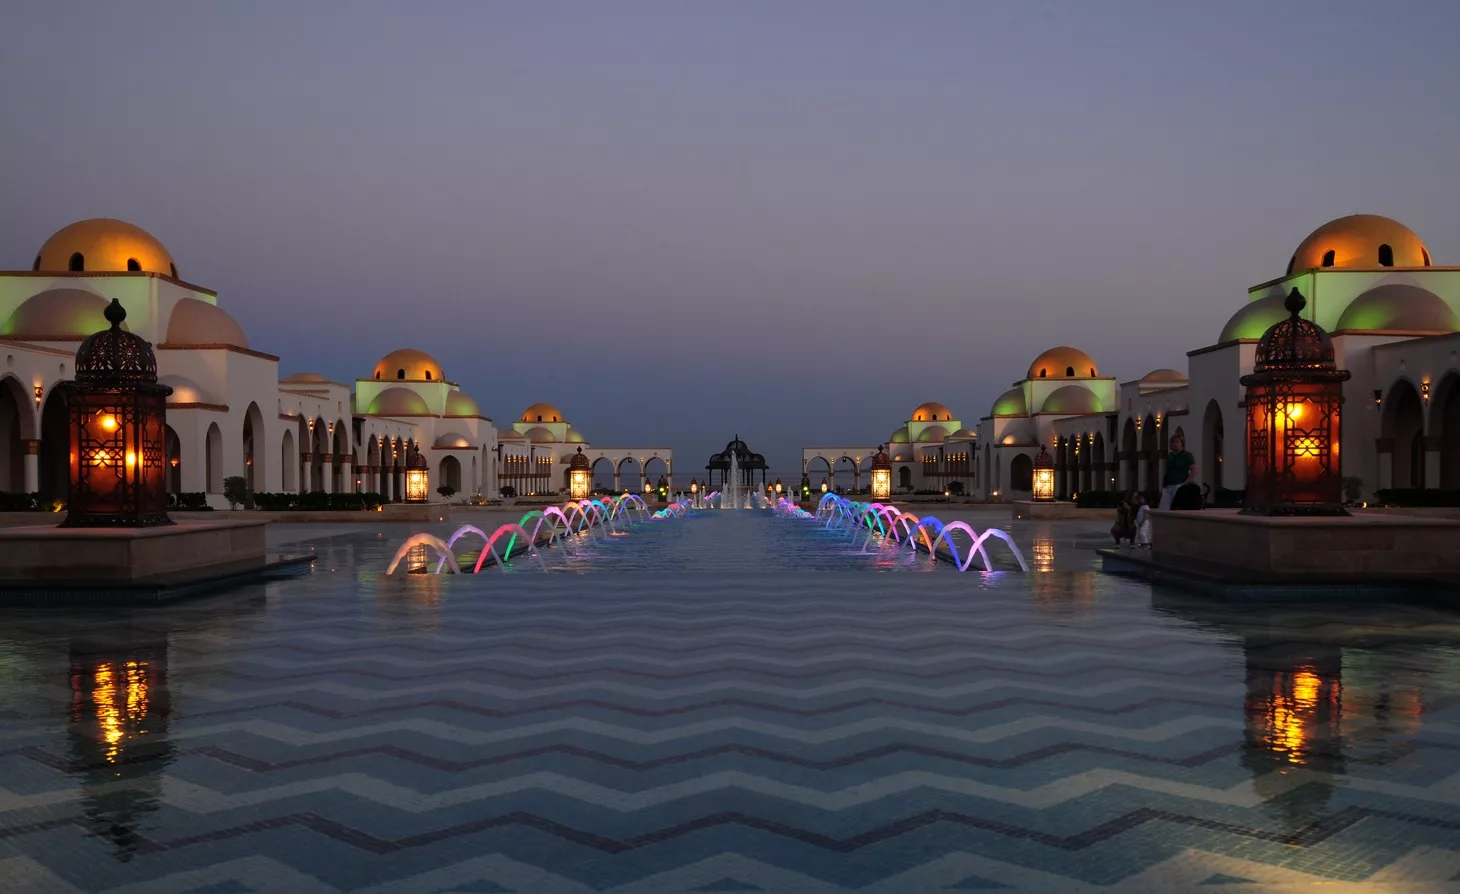 Old Town Sahl Hasheesh in Egypt, Africa | Architecture - Rated 3.8